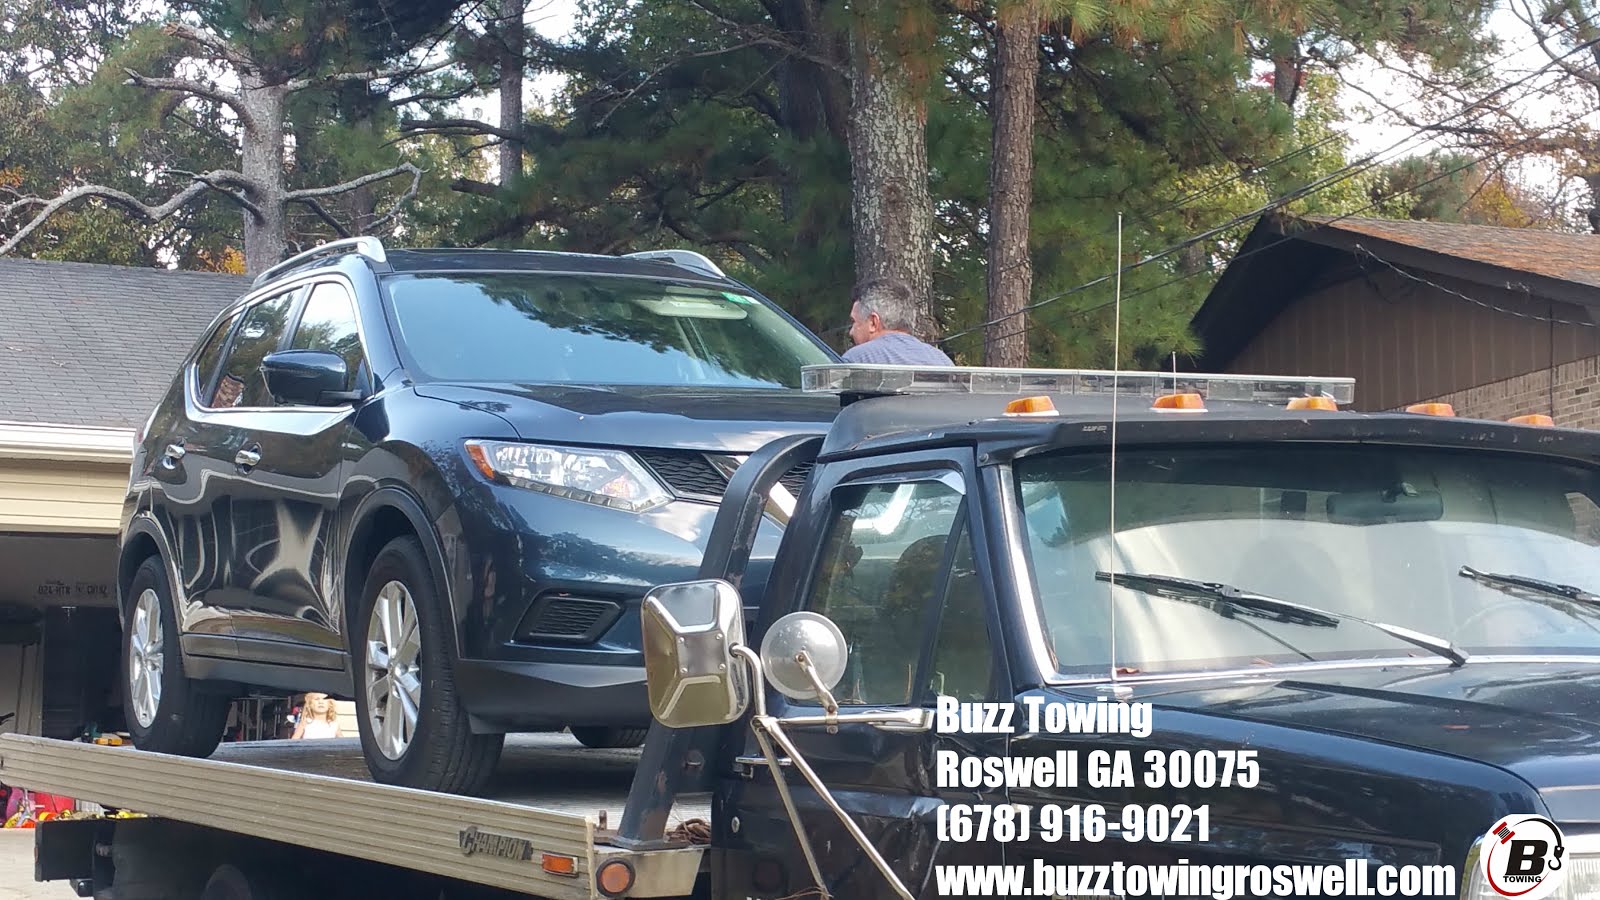 Buzz Towing - Towing service in Roswell, GA